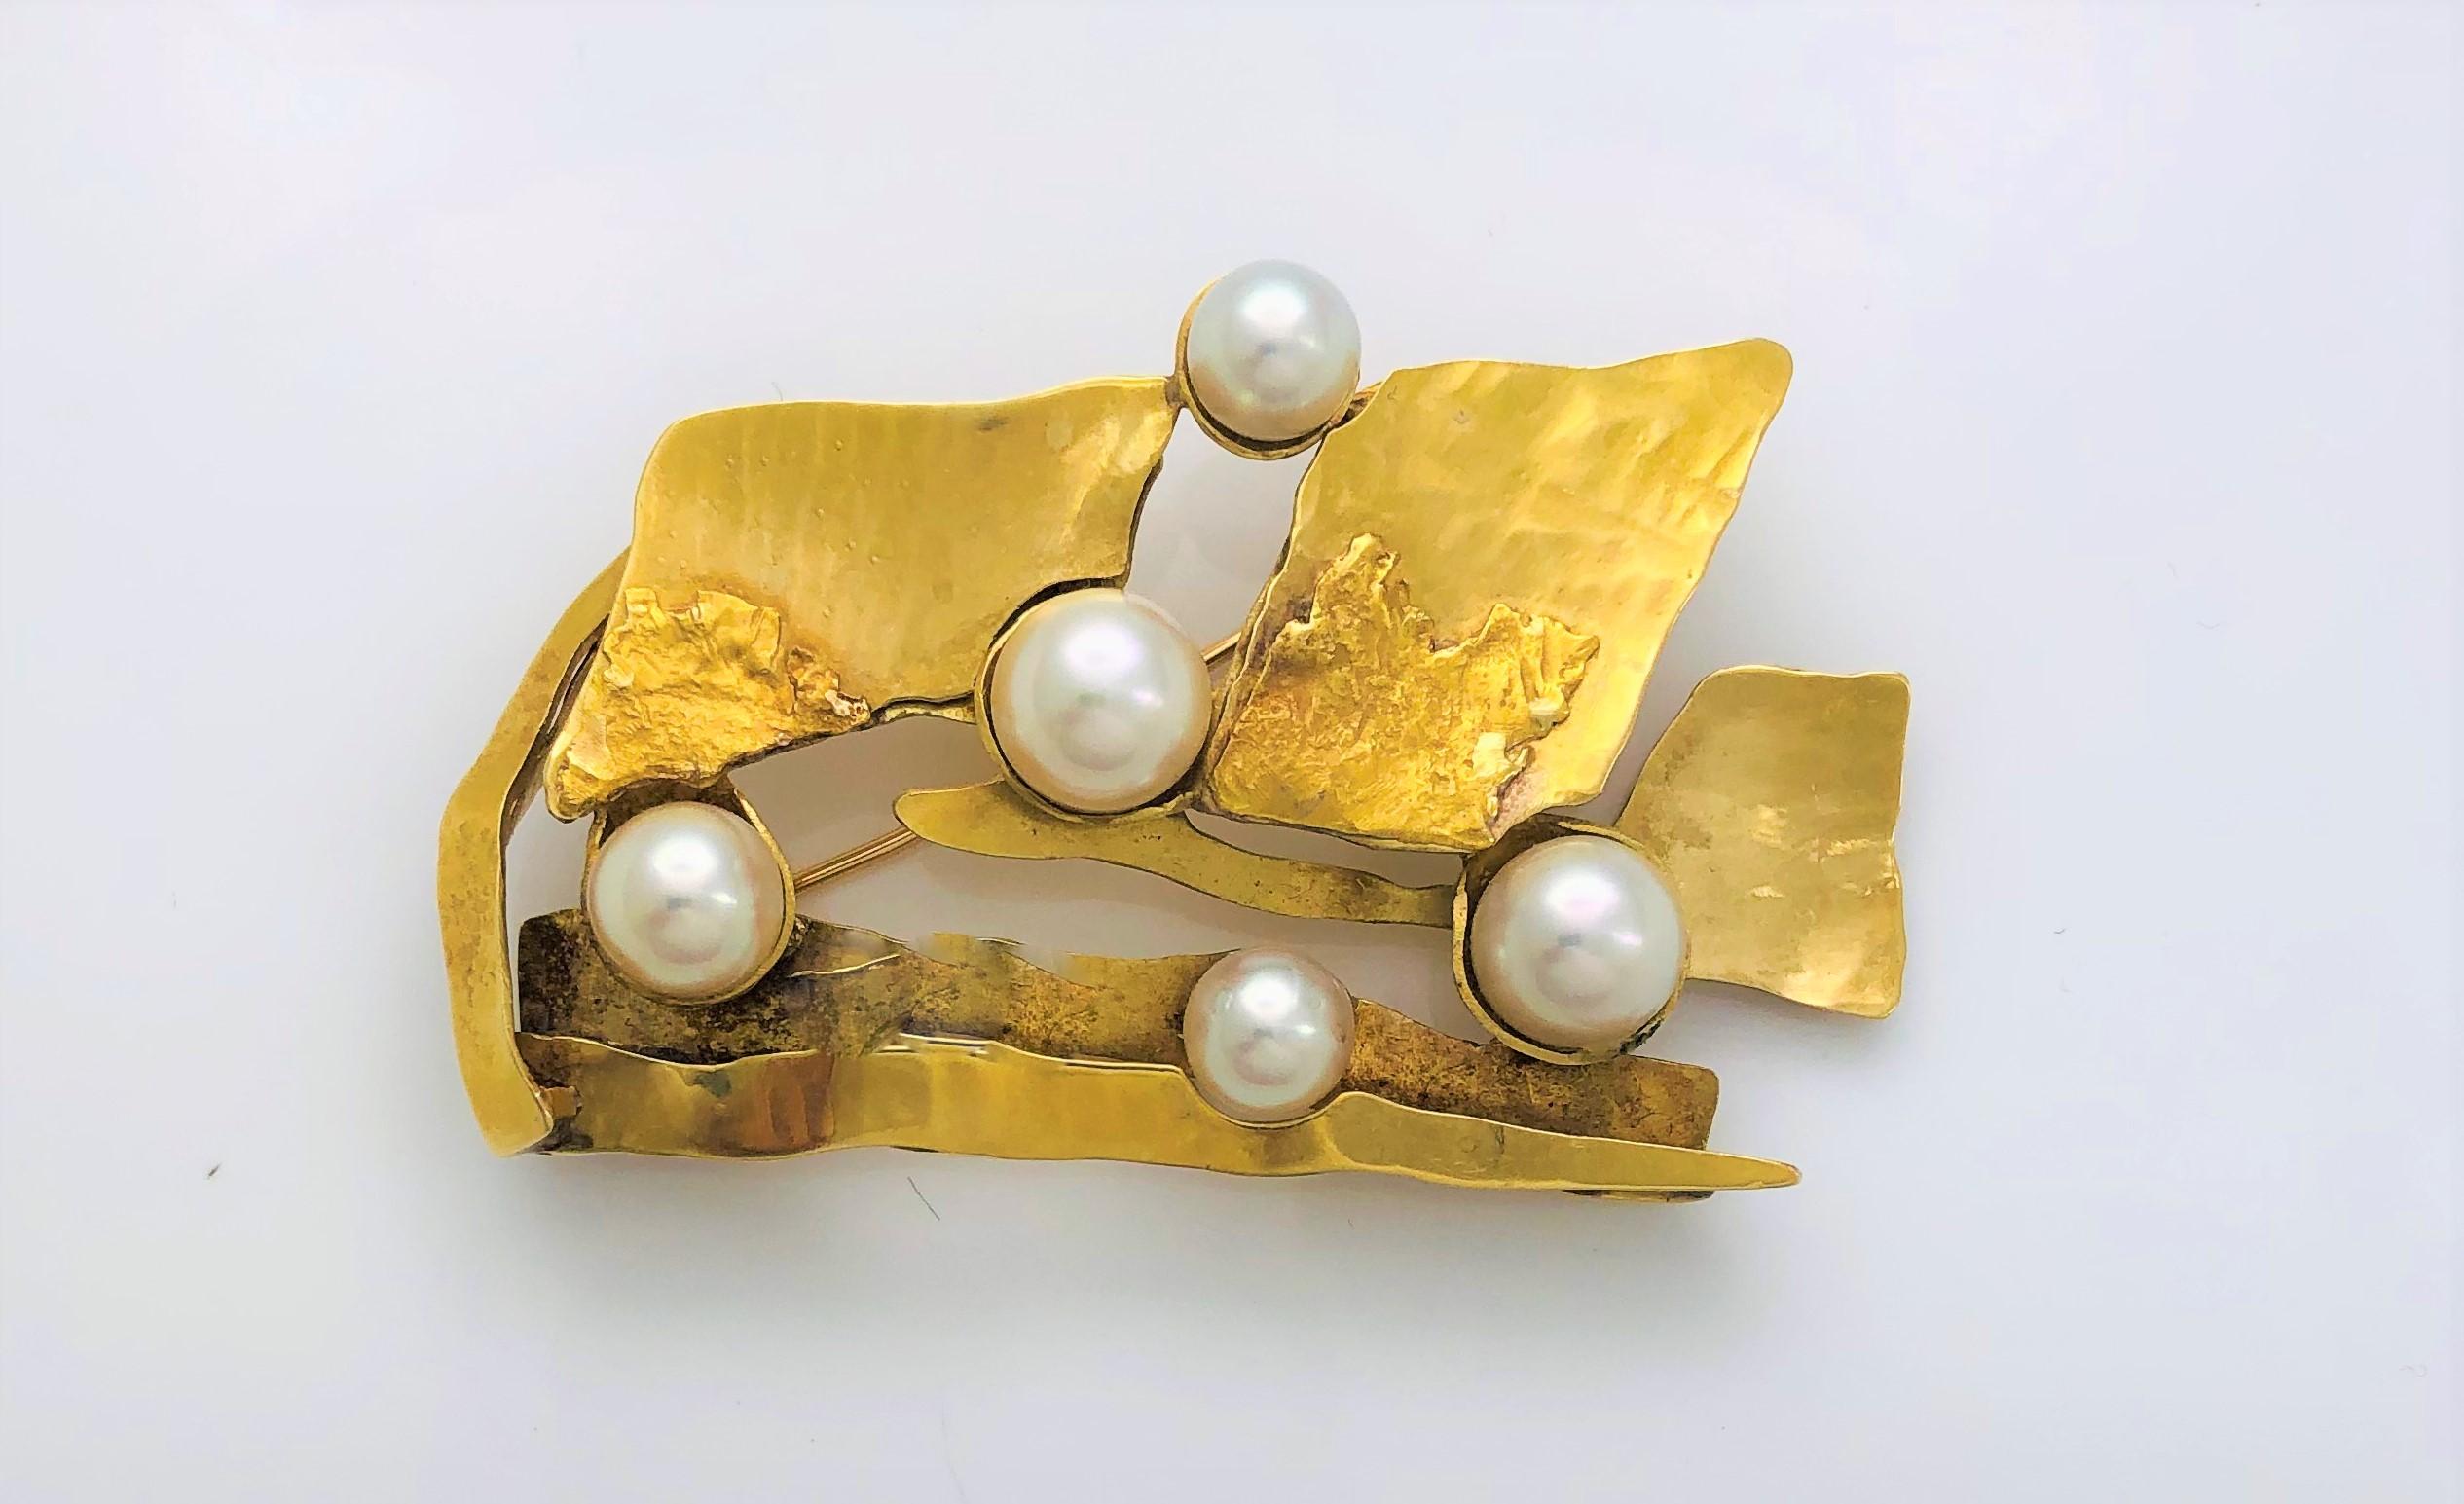 A wearable art piece!  This amazing design by Atelier Janiye is gorgeous!
Beautifully crafted design in 24 karat yellow and 18 karat yellow hammered gold.
5 total pearls.  2 approximately 8.5-9.0mm, 2 approximately 7.0-7.5mm and 1 approximately